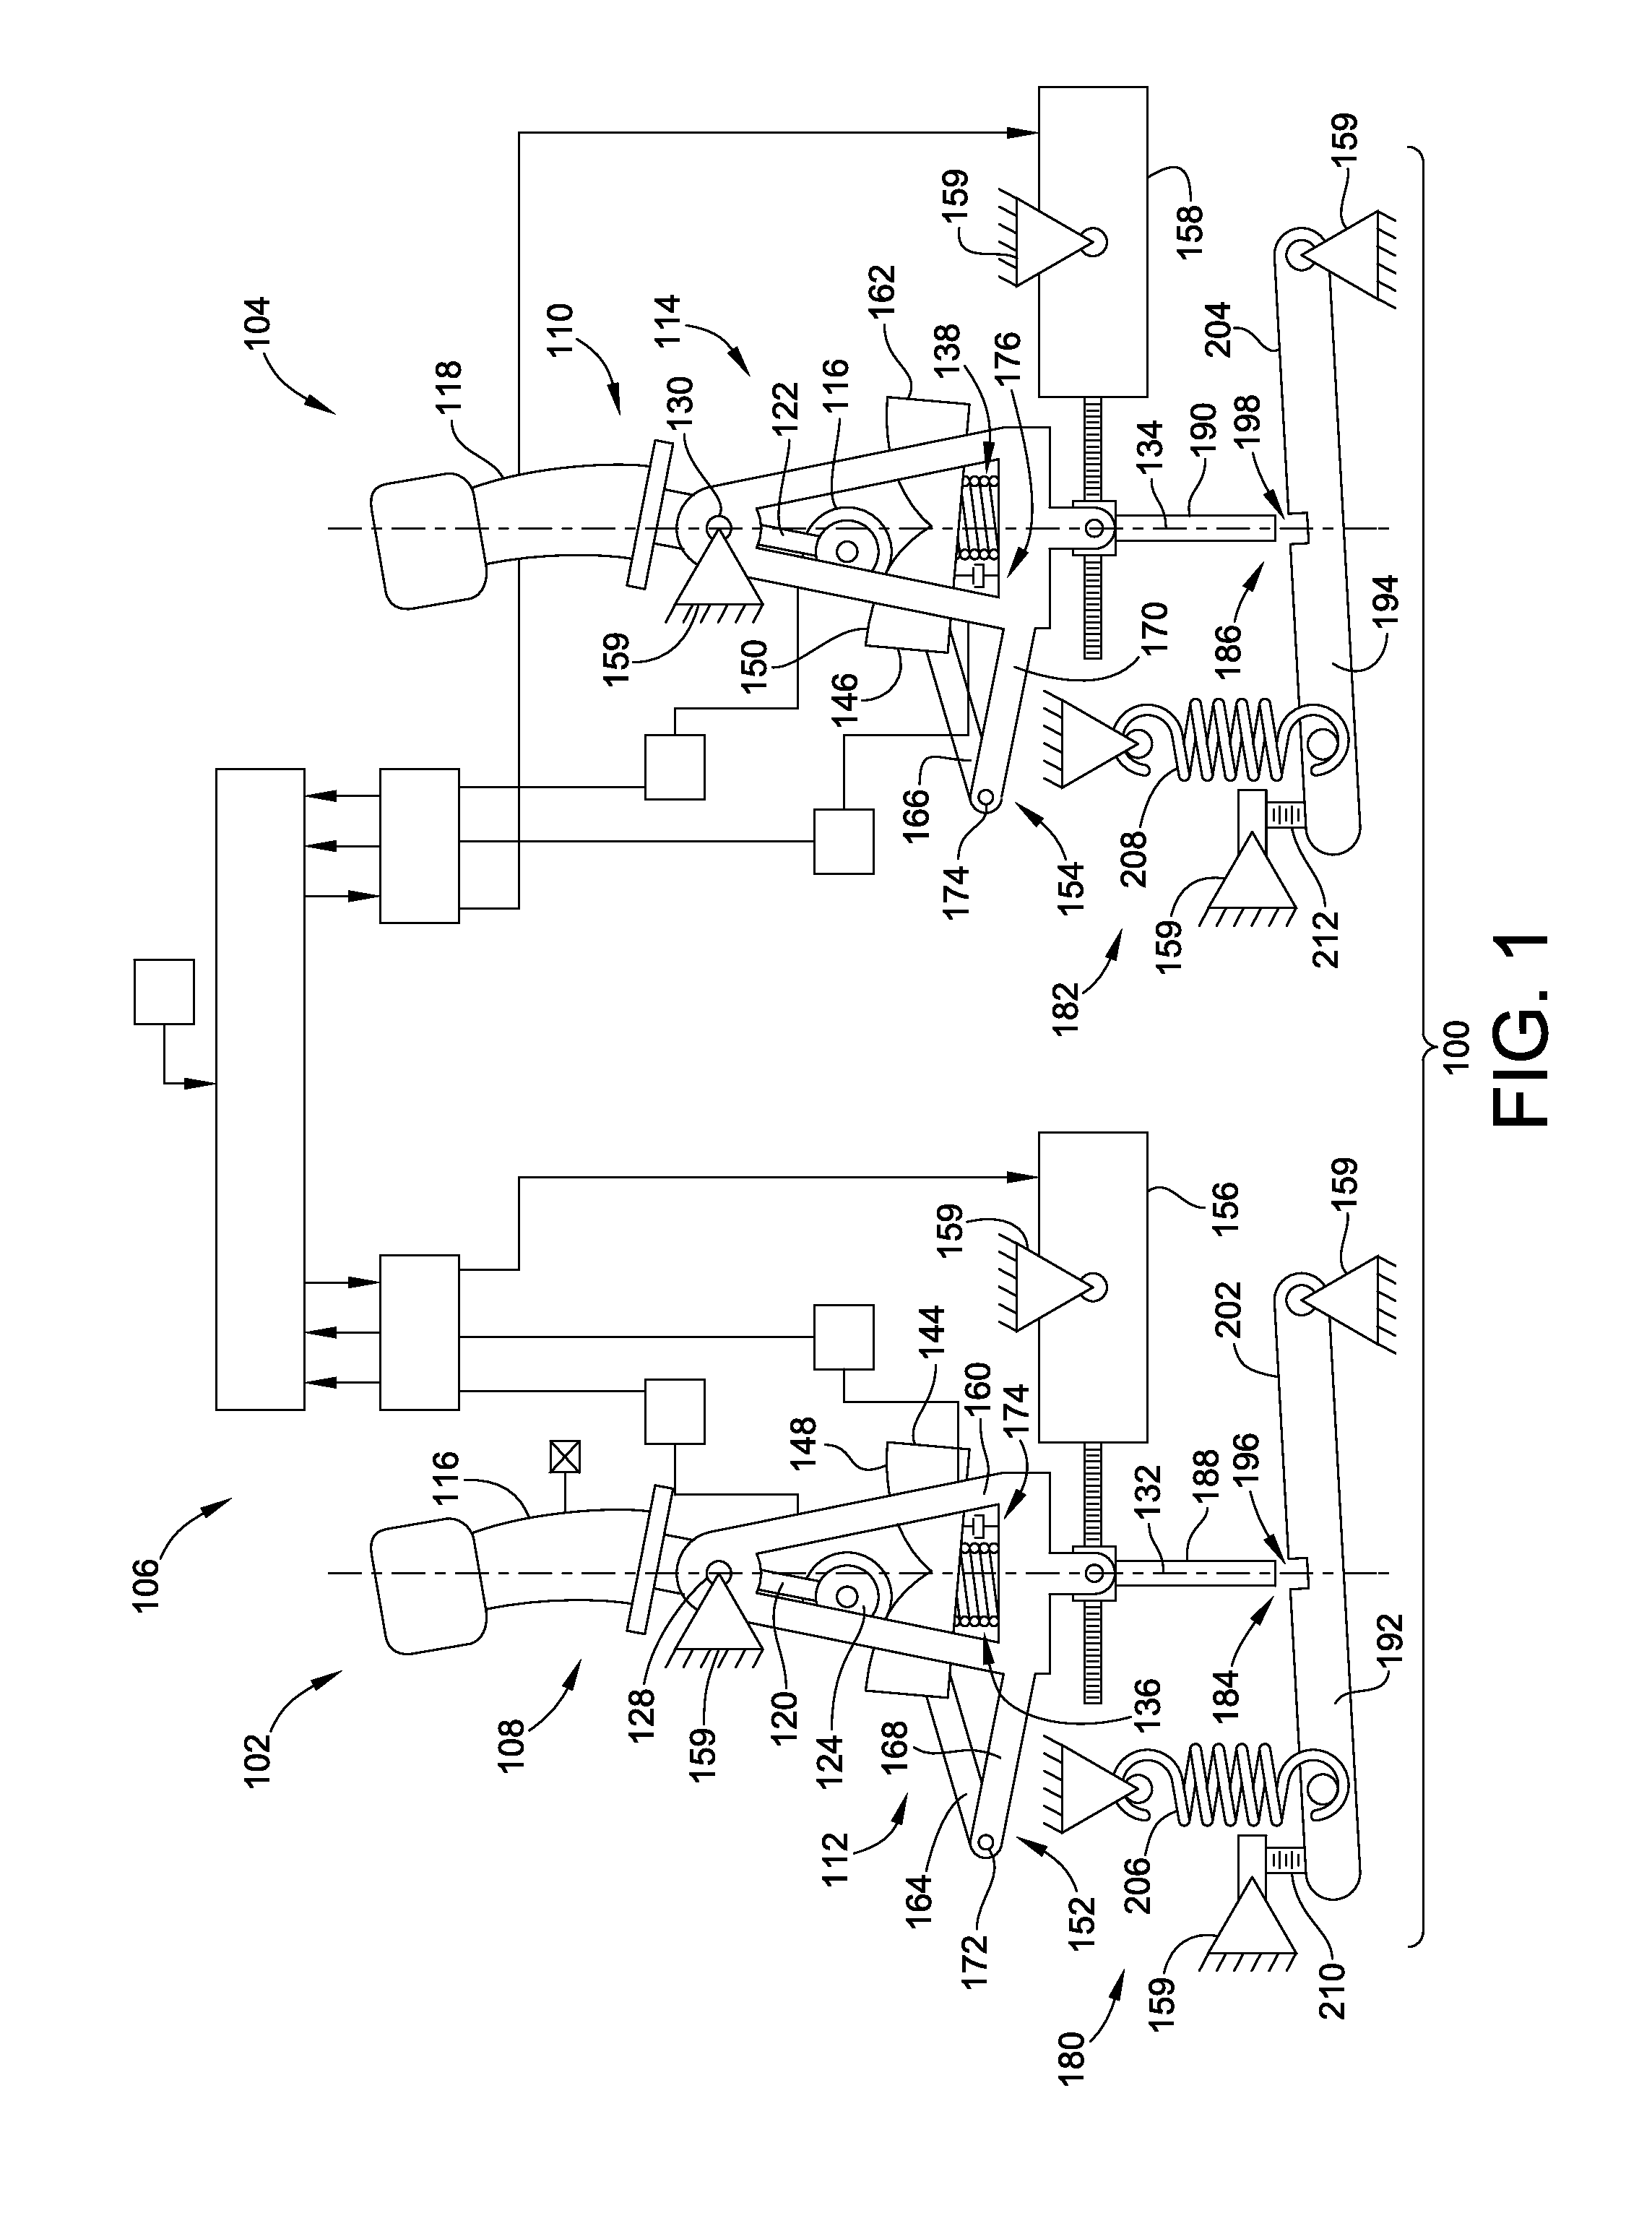 Active Control Column With Manually Activated Reversion to Passive Control Column